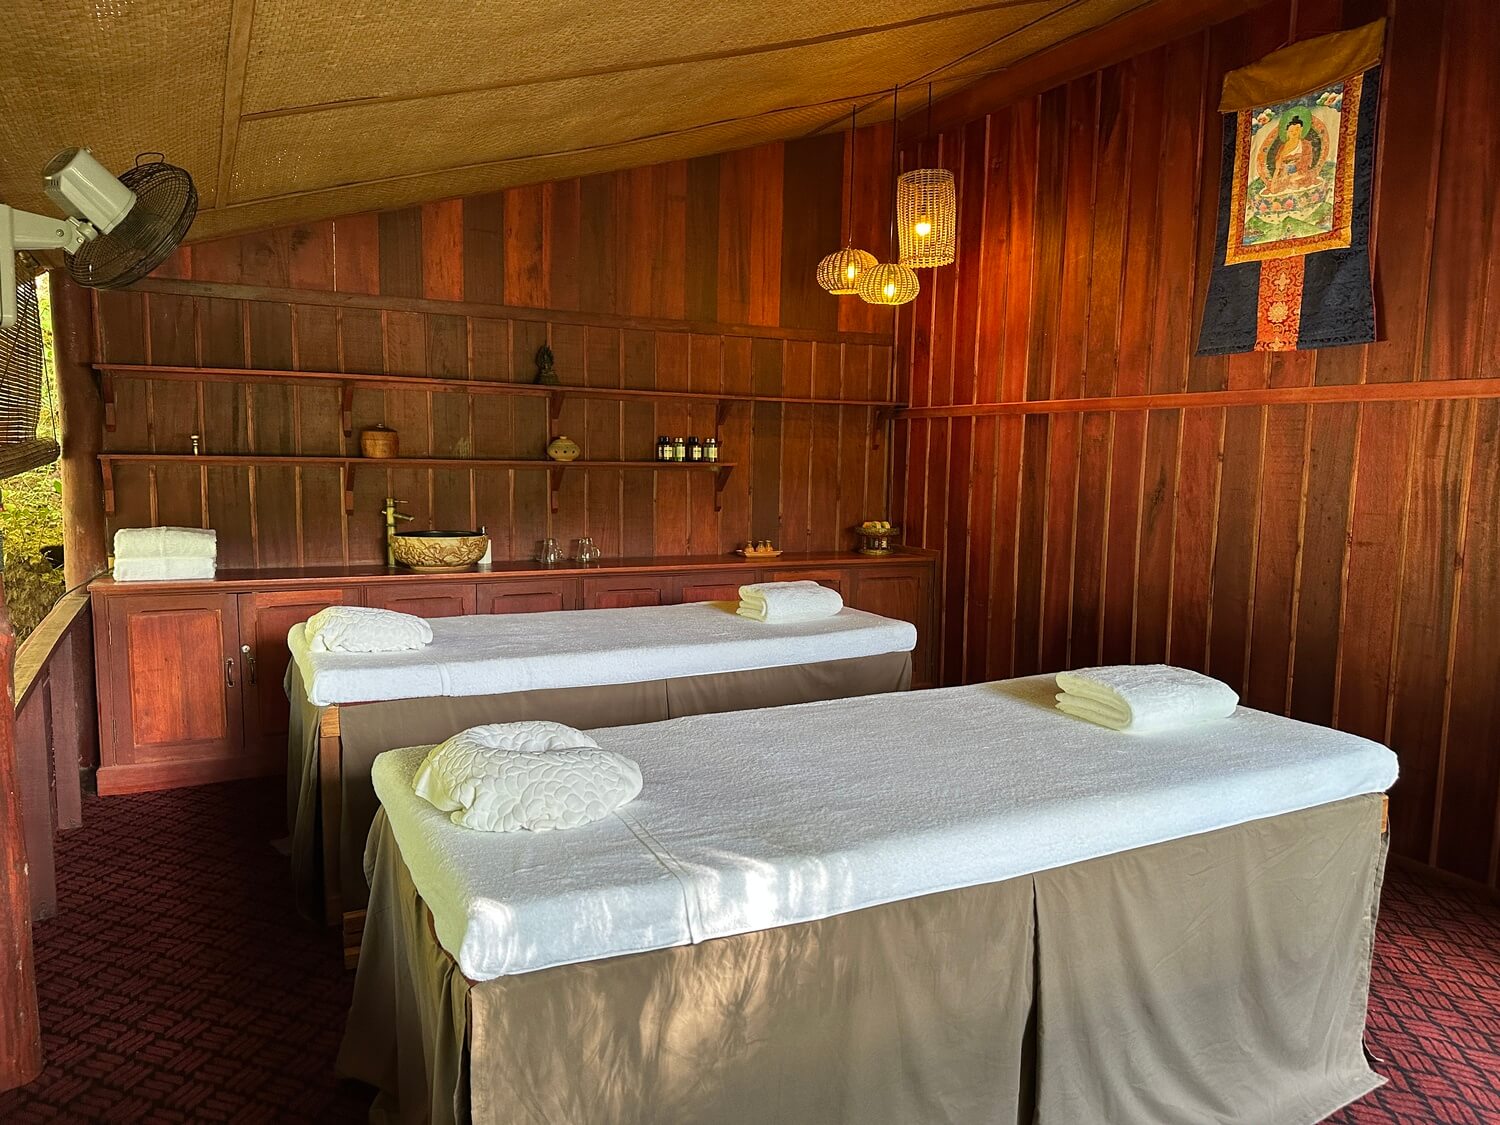 Two massage beds in a room with wood paneling in Luang Prabang.